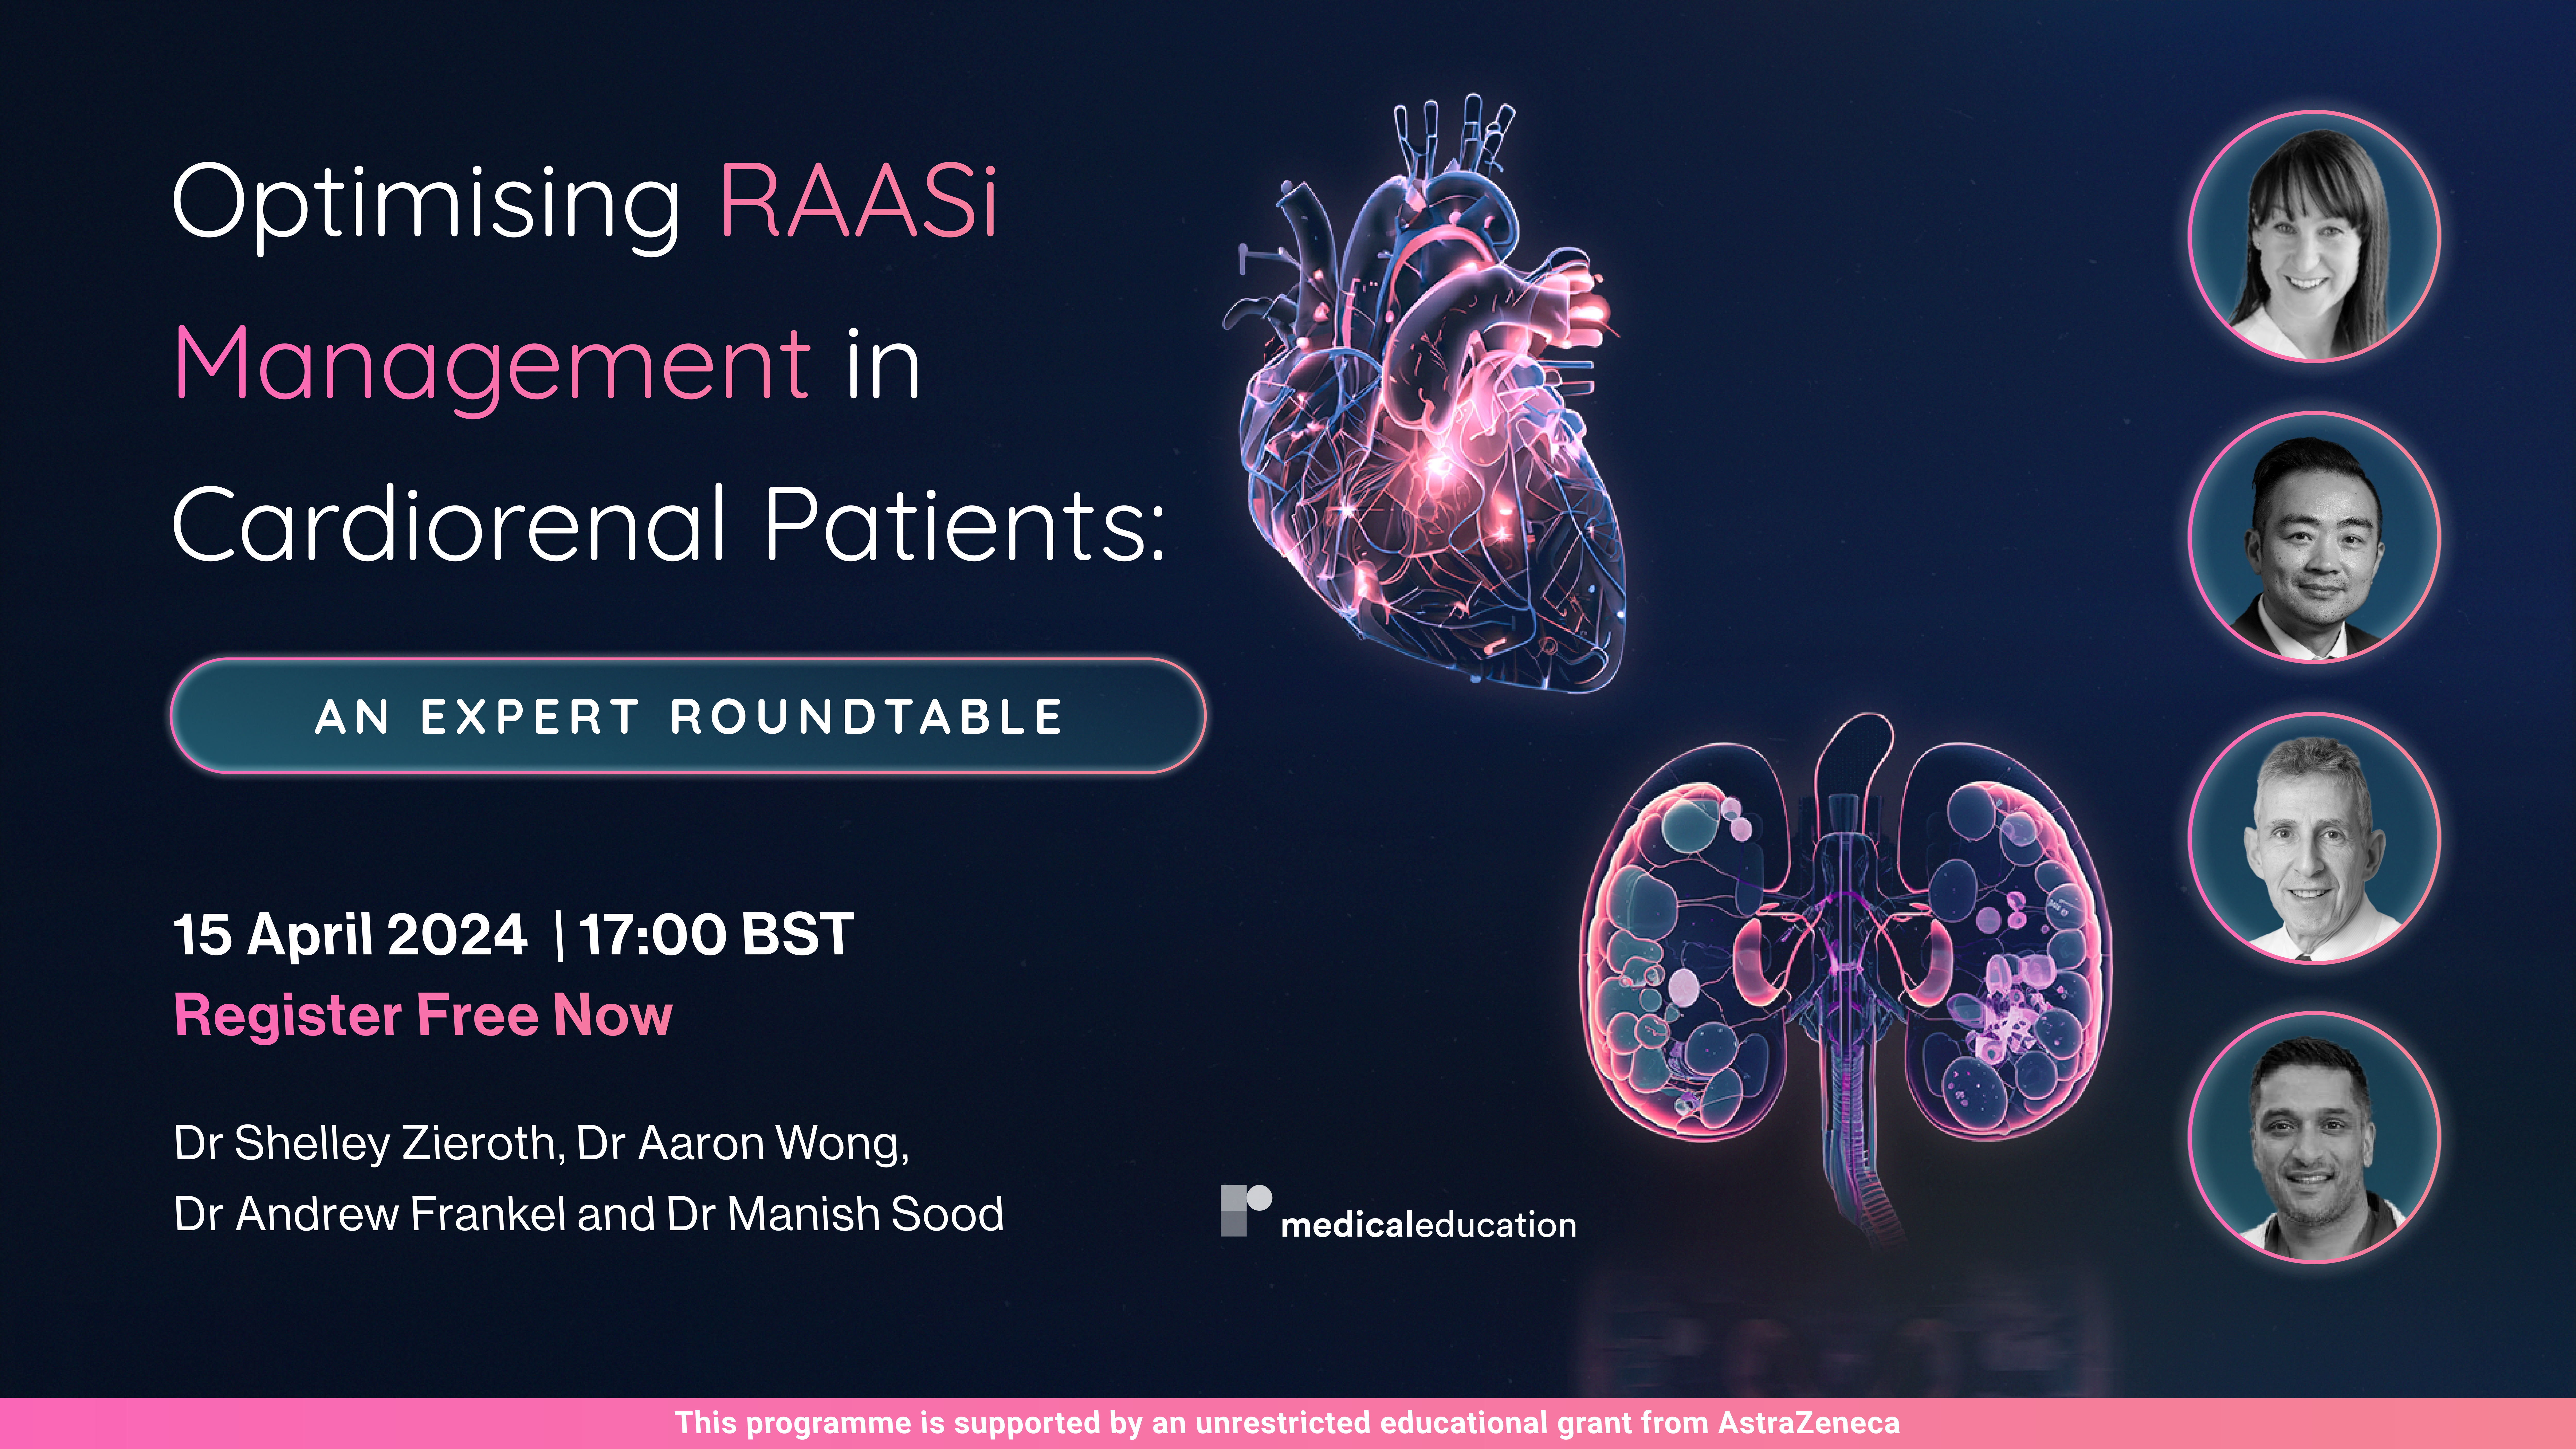 Optimising RAASi Management in Cardiorenal Patients: An Expert Roundtable